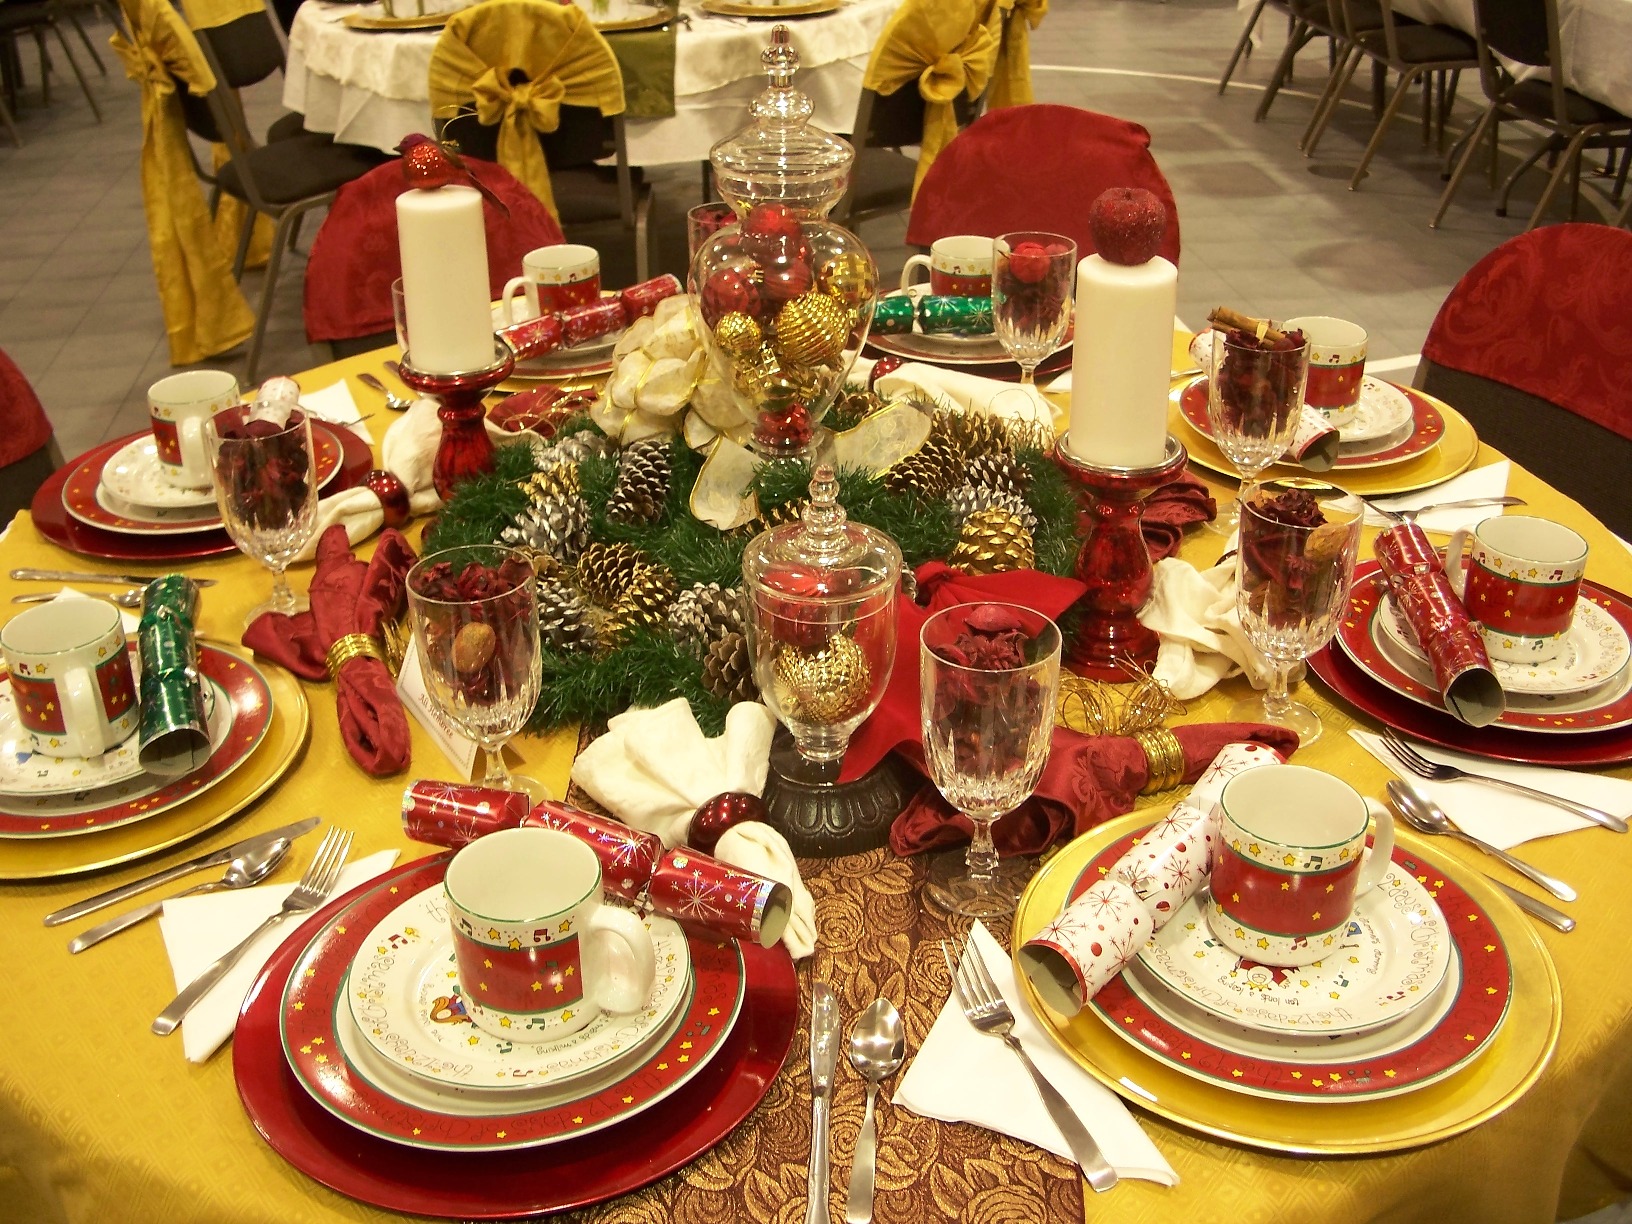 pine-cone-wreath-spices-holiday-table1.jpg